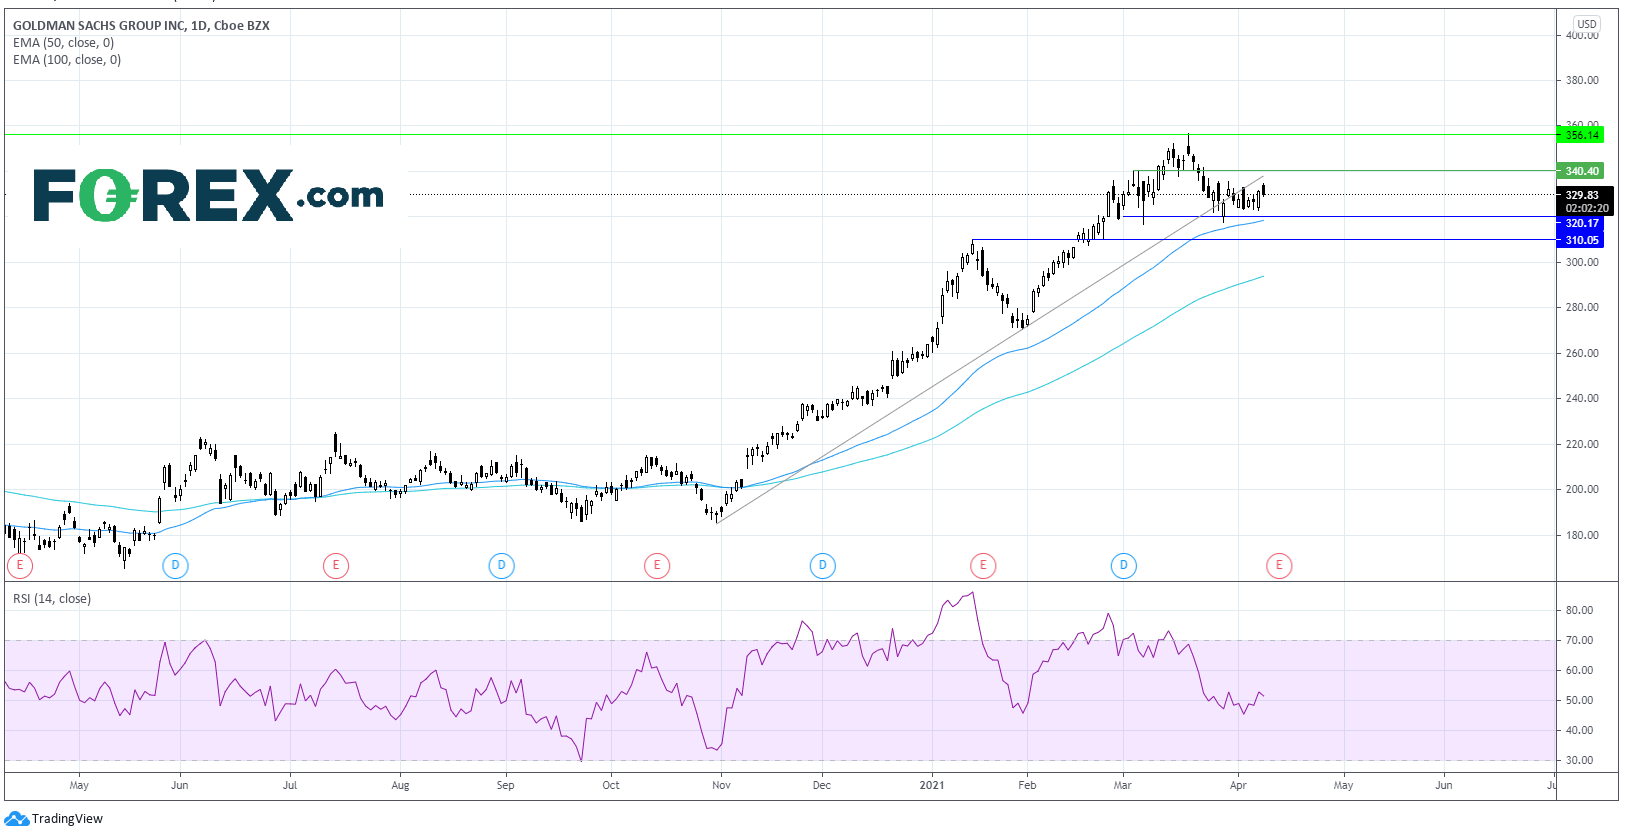 Chart analysis of Goldman Sachs group inc. Published in April 2021 by FOREX.com